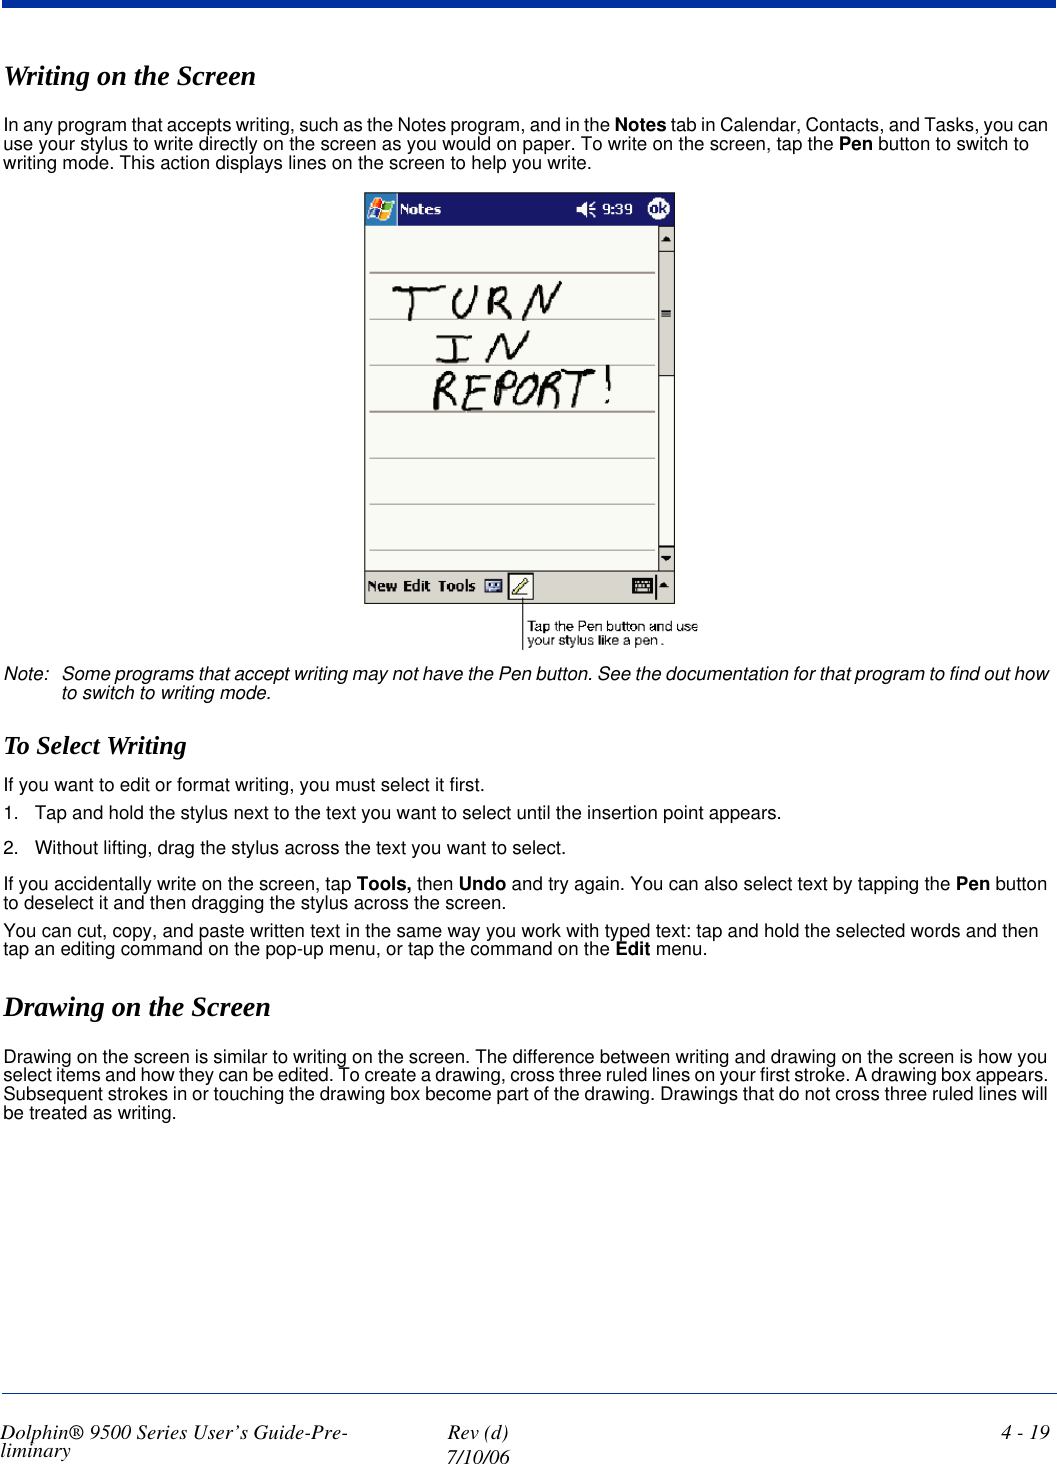 Dolphin® 9500 Series User’s Guide-Pre-liminary  Rev (d)7/10/064 - 19Writing on the ScreenIn any program that accepts writing, such as the Notes program, and in the Notes tab in Calendar, Contacts, and Tasks, you can use your stylus to write directly on the screen as you would on paper. To write on the screen, tap the Pen button to switch to writing mode. This action displays lines on the screen to help you write.Note: Some programs that accept writing may not have the Pen button. See the documentation for that program to find out how to switch to writing mode.To Select WritingIf you want to edit or format writing, you must select it first.1. Tap and hold the stylus next to the text you want to select until the insertion point appears.2. Without lifting, drag the stylus across the text you want to select.If you accidentally write on the screen, tap Tools, then Undo and try again. You can also select text by tapping the Pen button to deselect it and then dragging the stylus across the screen.You can cut, copy, and paste written text in the same way you work with typed text: tap and hold the selected words and then tap an editing command on the pop-up menu, or tap the command on the Edit menu.Drawing on the ScreenDrawing on the screen is similar to writing on the screen. The difference between writing and drawing on the screen is how you select items and how they can be edited. To create a drawing, cross three ruled lines on your first stroke. A drawing box appears. Subsequent strokes in or touching the drawing box become part of the drawing. Drawings that do not cross three ruled lines will be treated as writing.